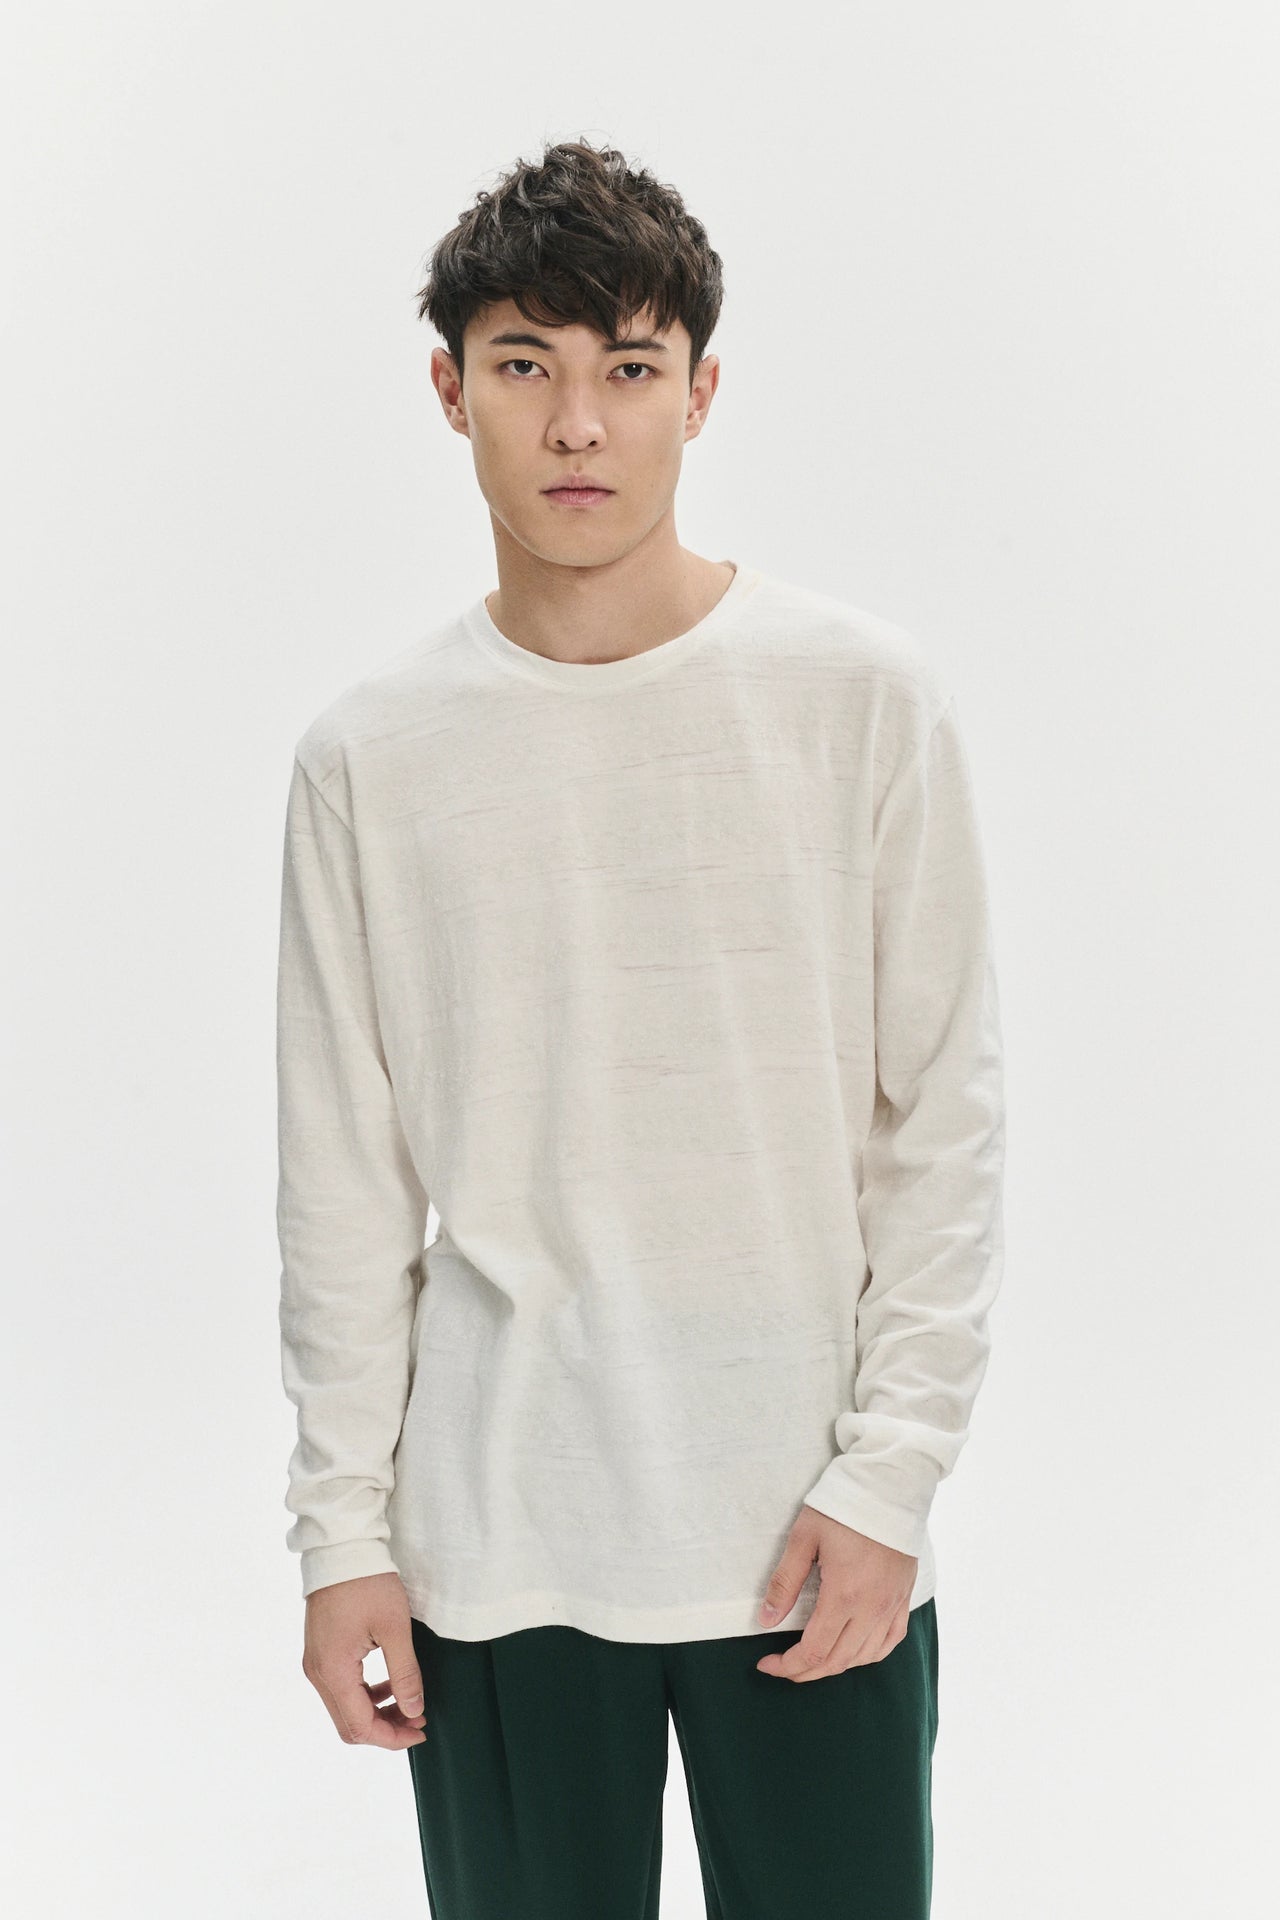 Long Sleeve in a White Japanese Slow-Knit Cotton Jersey